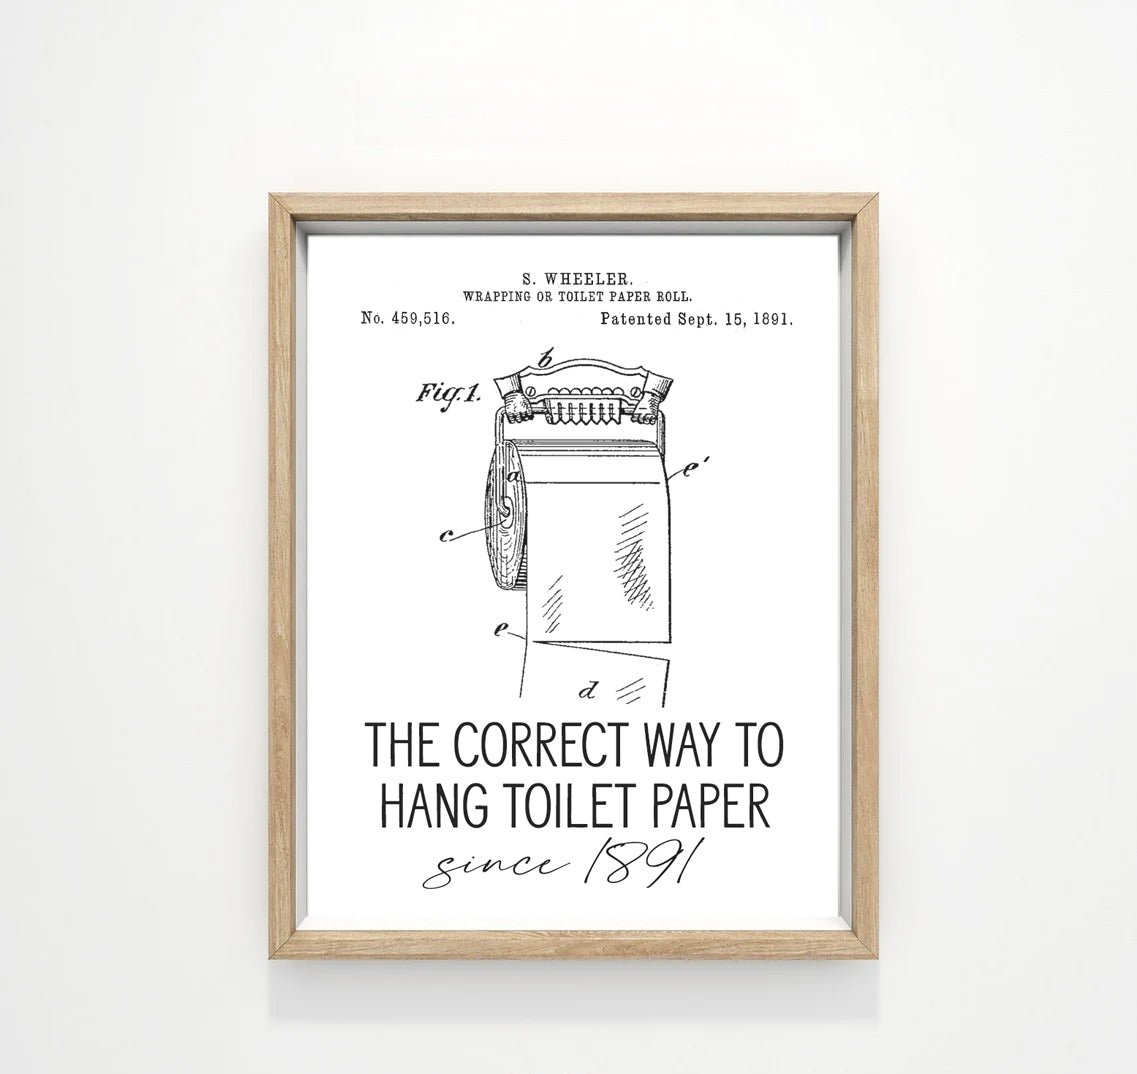 The Correct Way To Hang Toilet Paper Since 1891 - Lettered & Lined